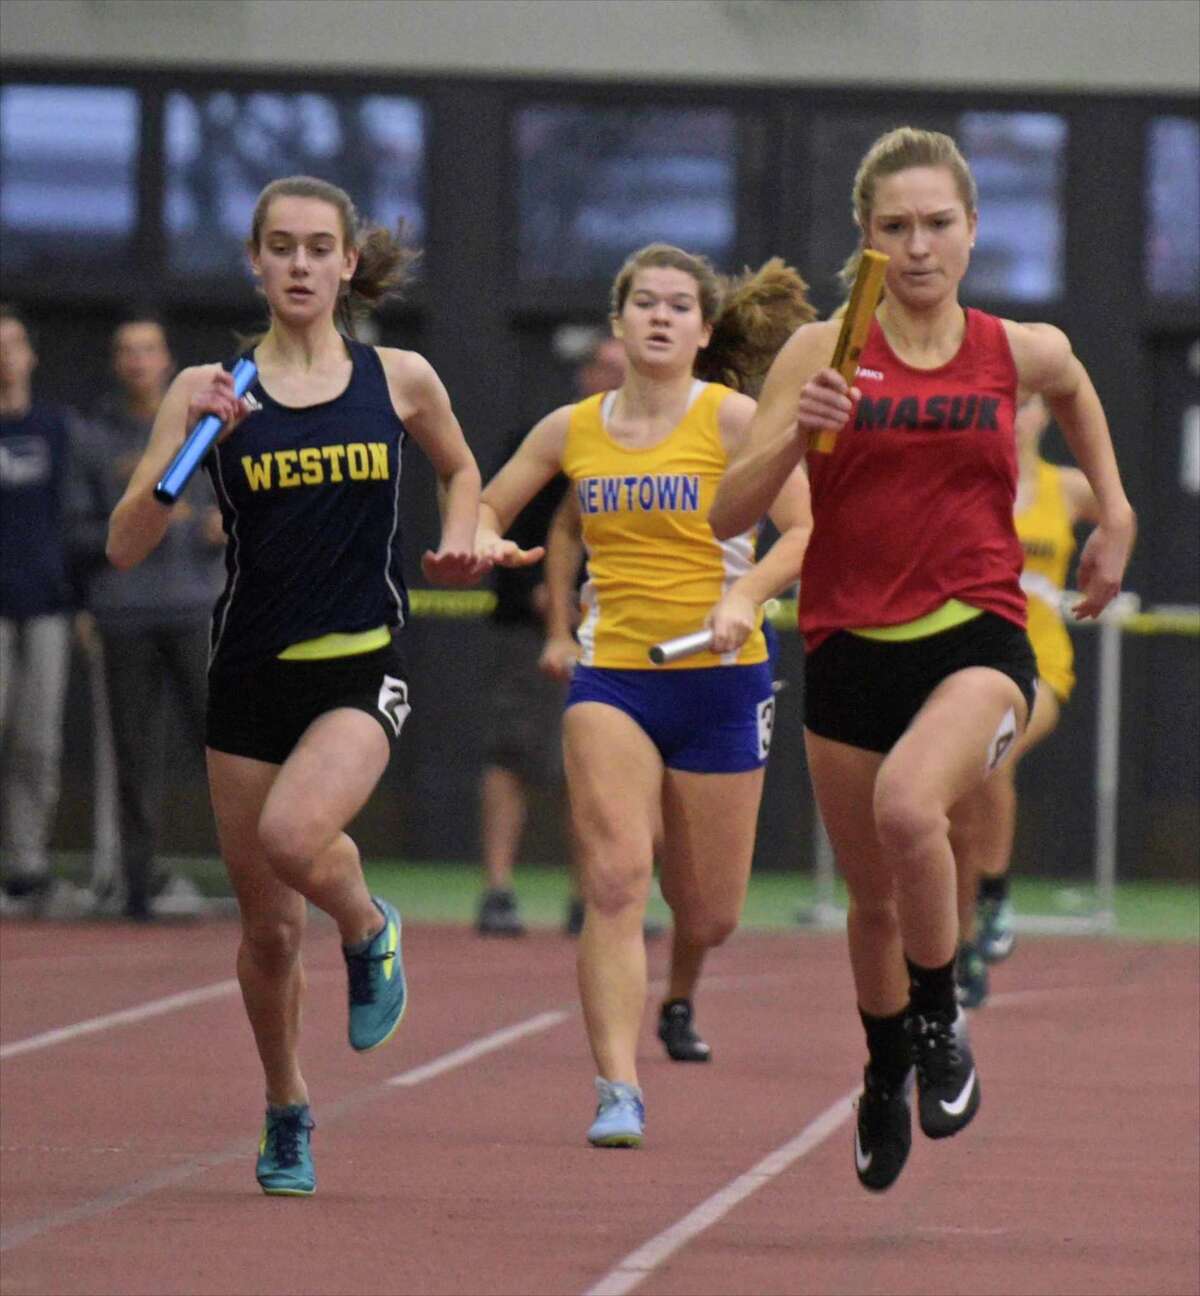 SWC girls indoor track championship at Floyd Little Athletic Center, New Haven, Conn, on Saturday night, February 3, 2018.